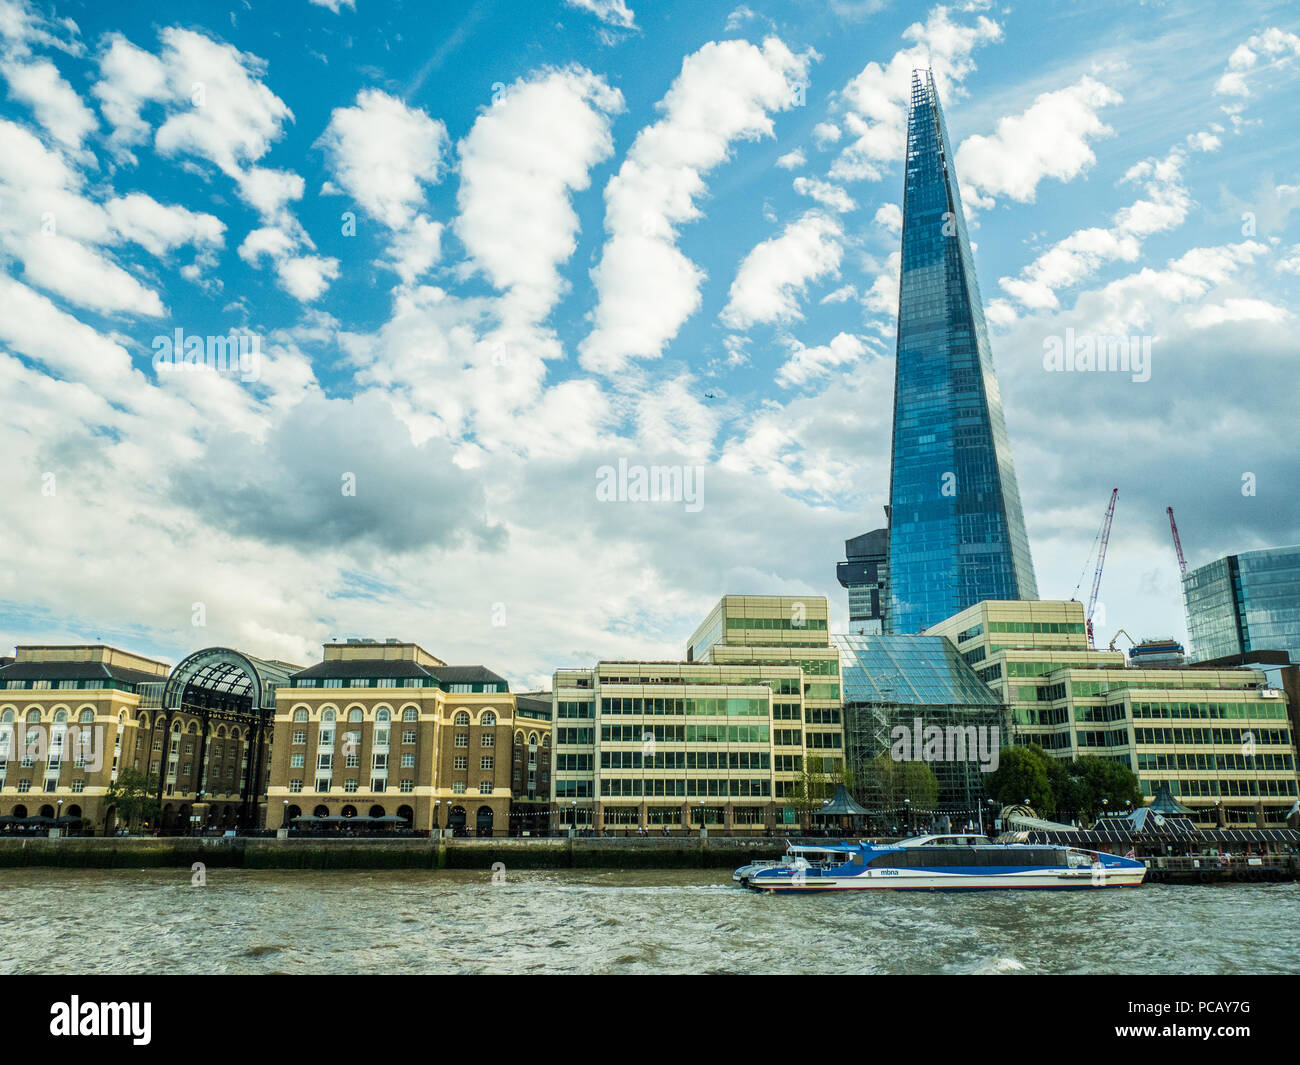 Southwark area of London on the South Bank of the River Thames with The Shard & the Hay's Galleria (left). Stock Photo